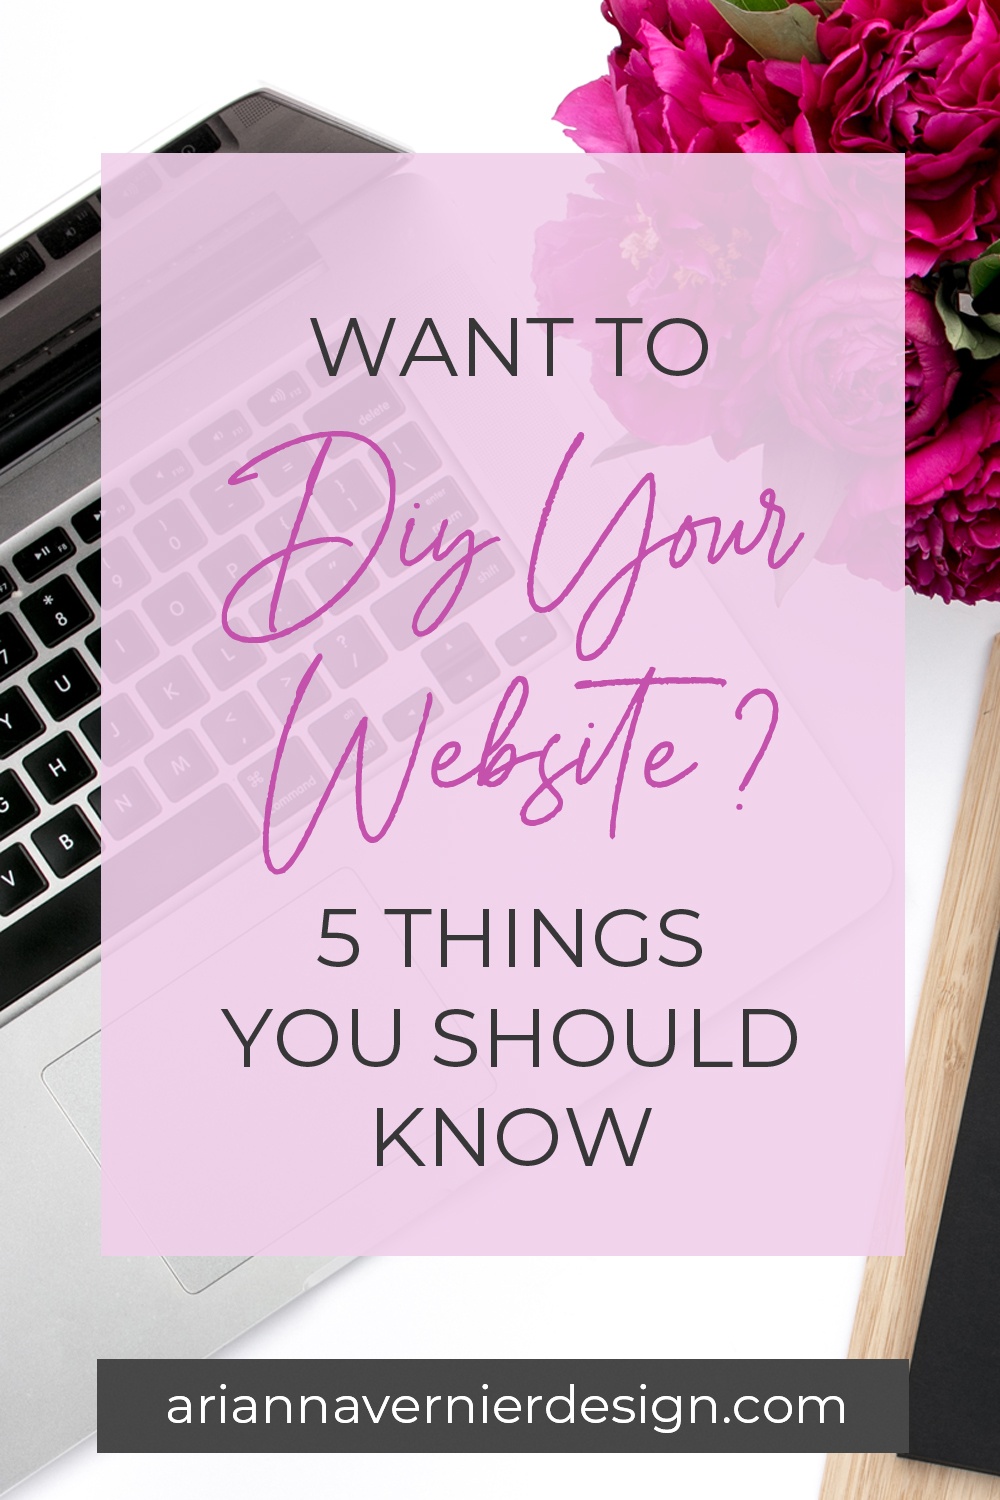 Pinterest pin with a laptop in the background, with a light purple rectangle over top, and the title "Want to DIY Your Website? 5 Things You Should Know"